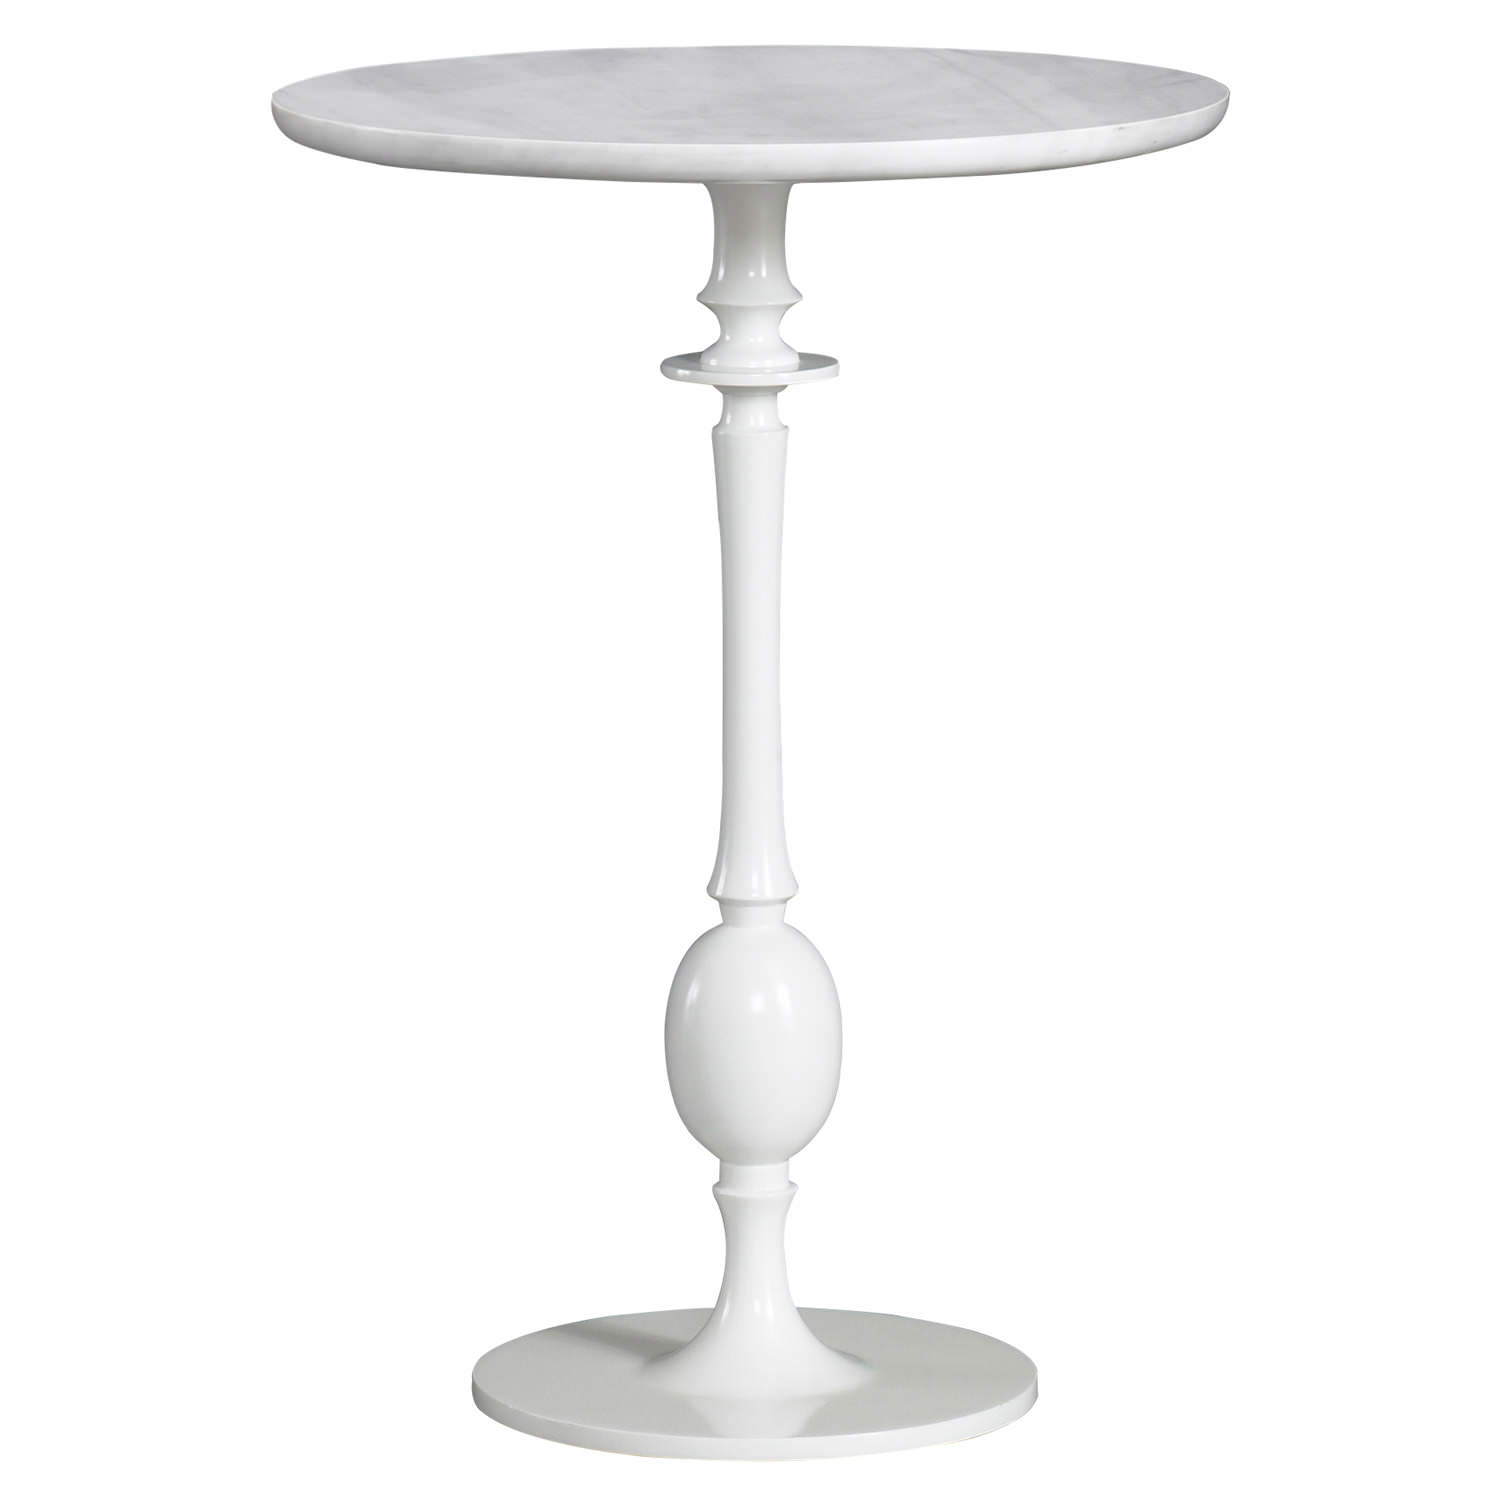 build pedestal accent table khandzoo home decor white simplify inspiration gallery from and wood side rustic farm tables kitchen light fixtures target couches inch round linen